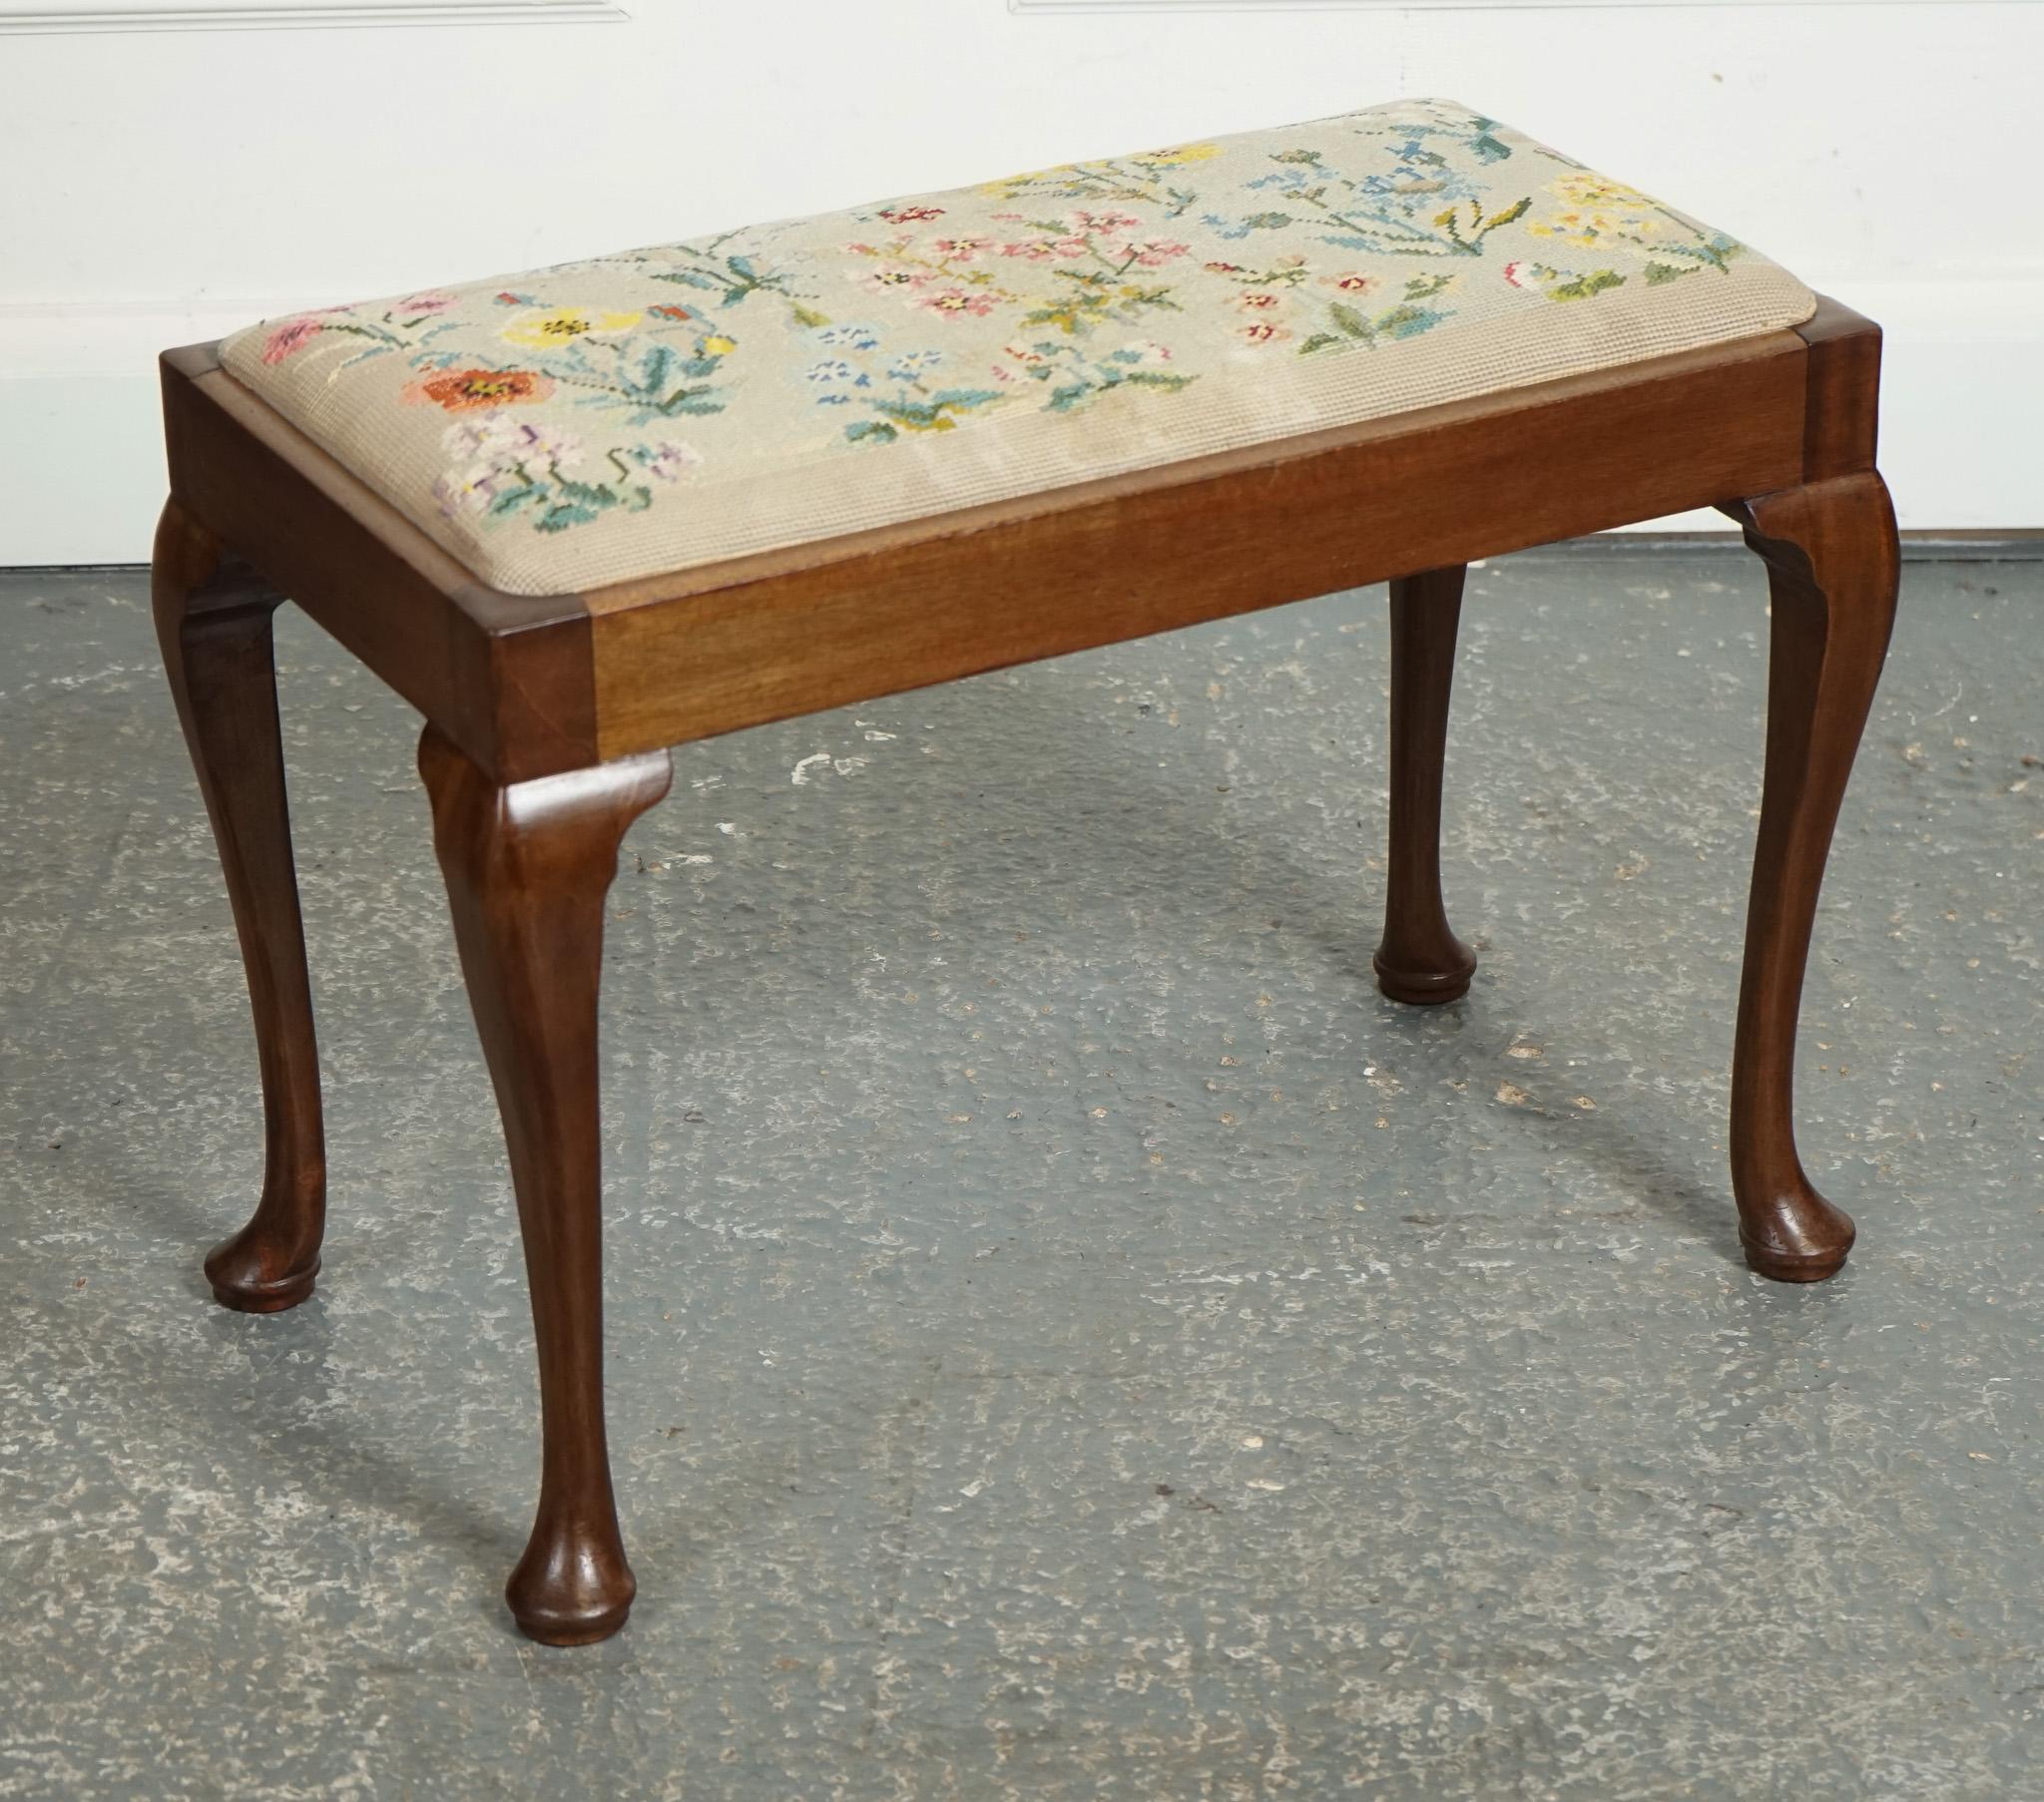 
We are delighted to offer for sale this Large Piano Dressing Table Stool With Flower Stitchwork.

 An exquisite piece of furniture that exudes elegance and sophistication. This beautifully crafted stool is designed to complement a luxurious